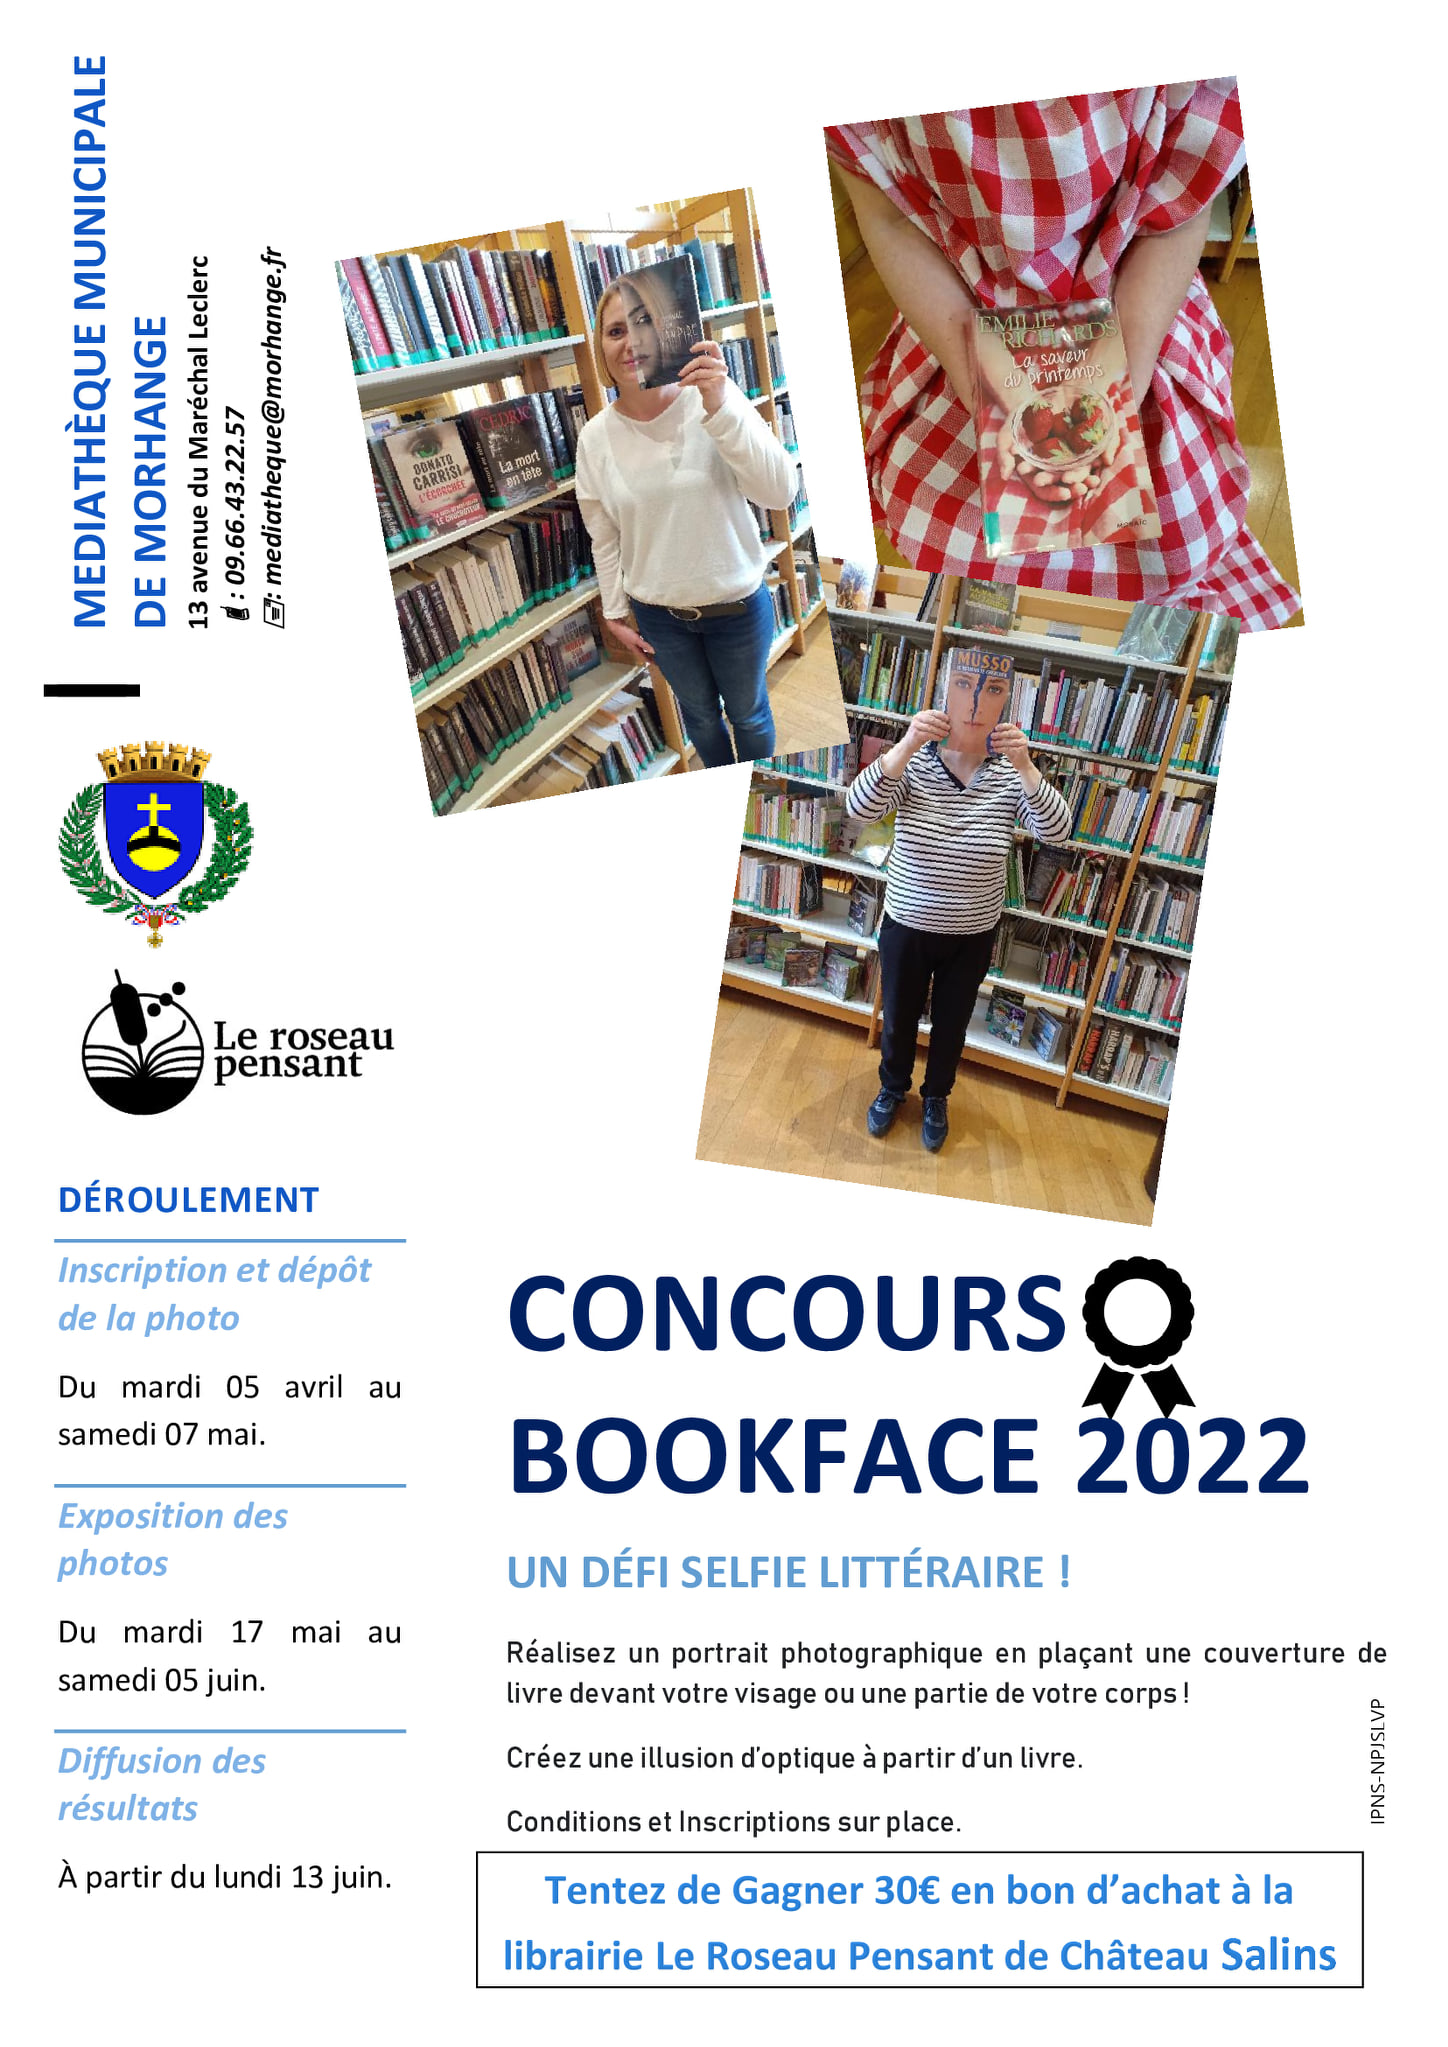 Concours Bookface 2022